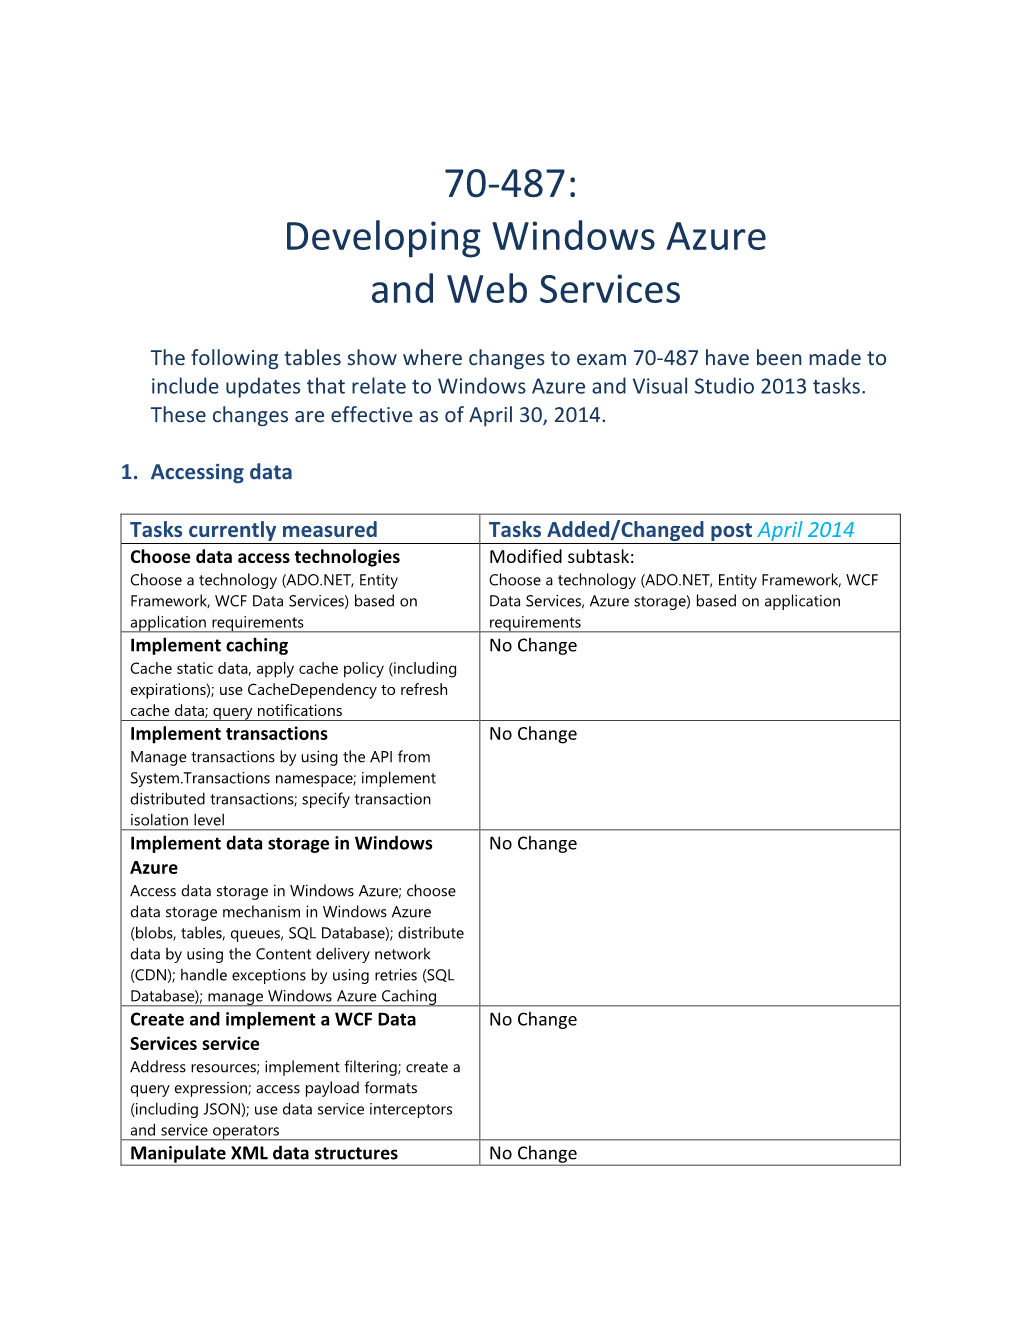 70-487: Developing Windows Azure and Web Services